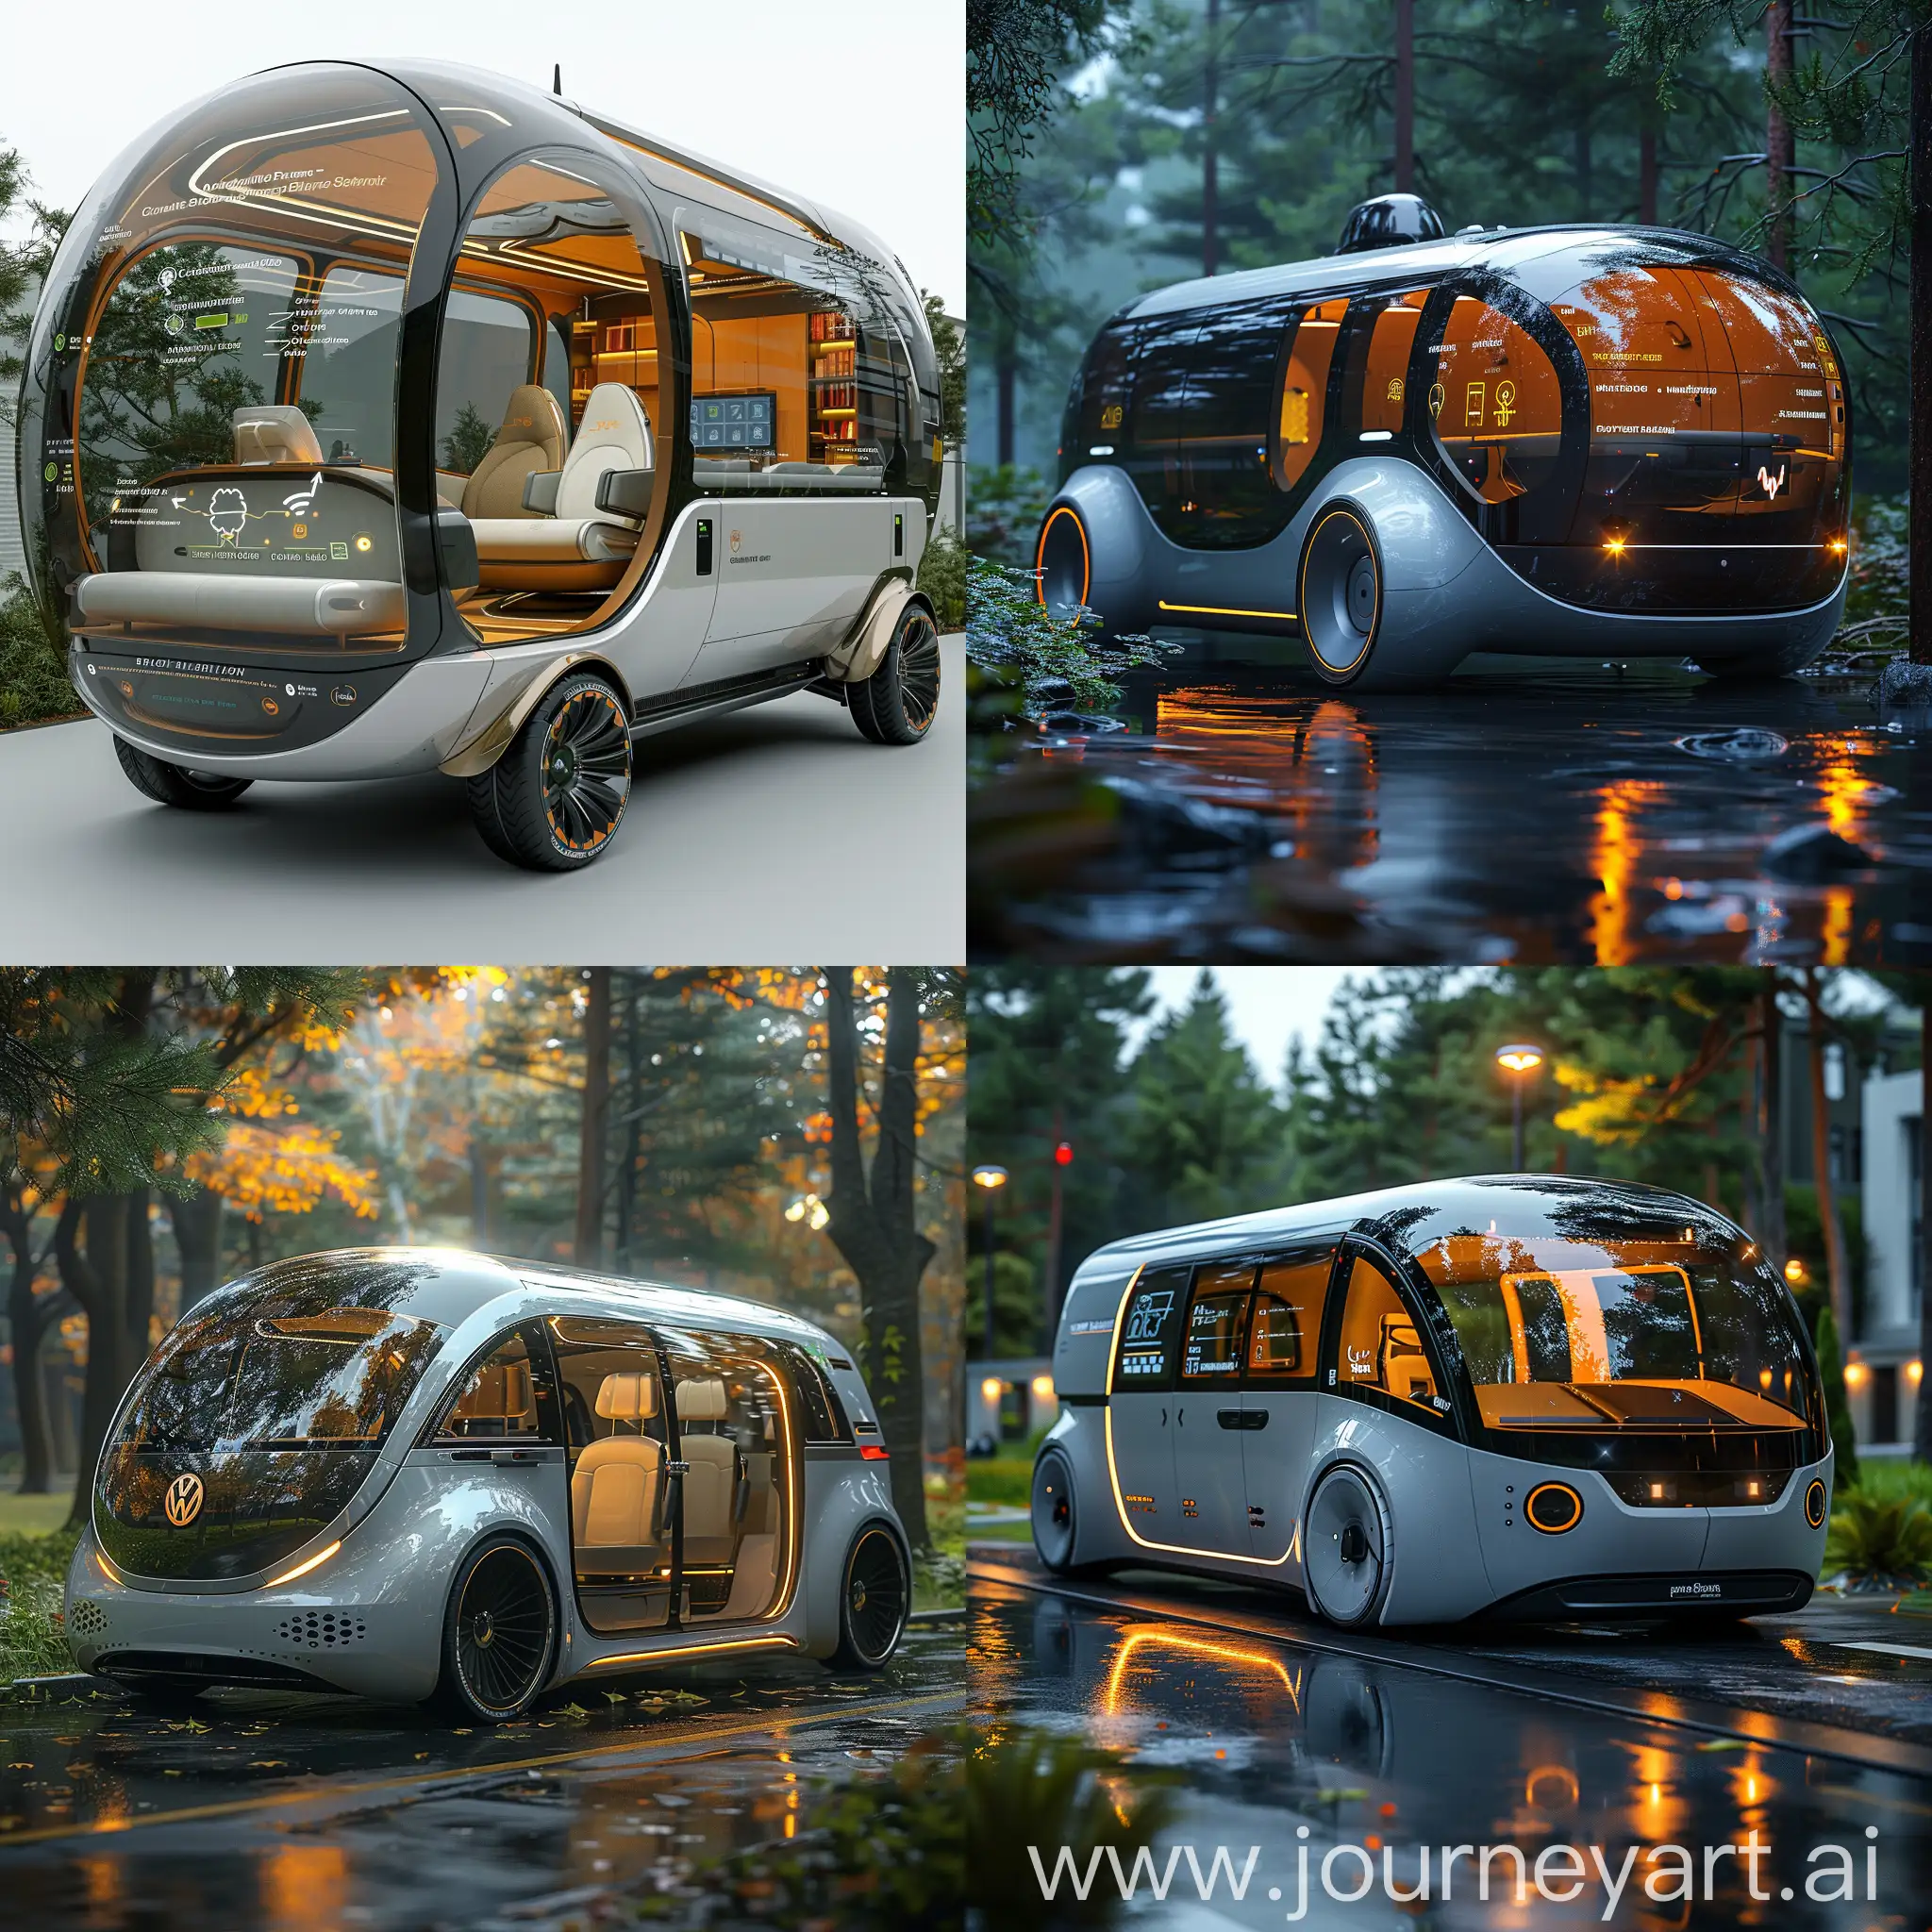 Futuristic-Microbus-with-Autonomous-Driving-and-Augmented-Reality-Features